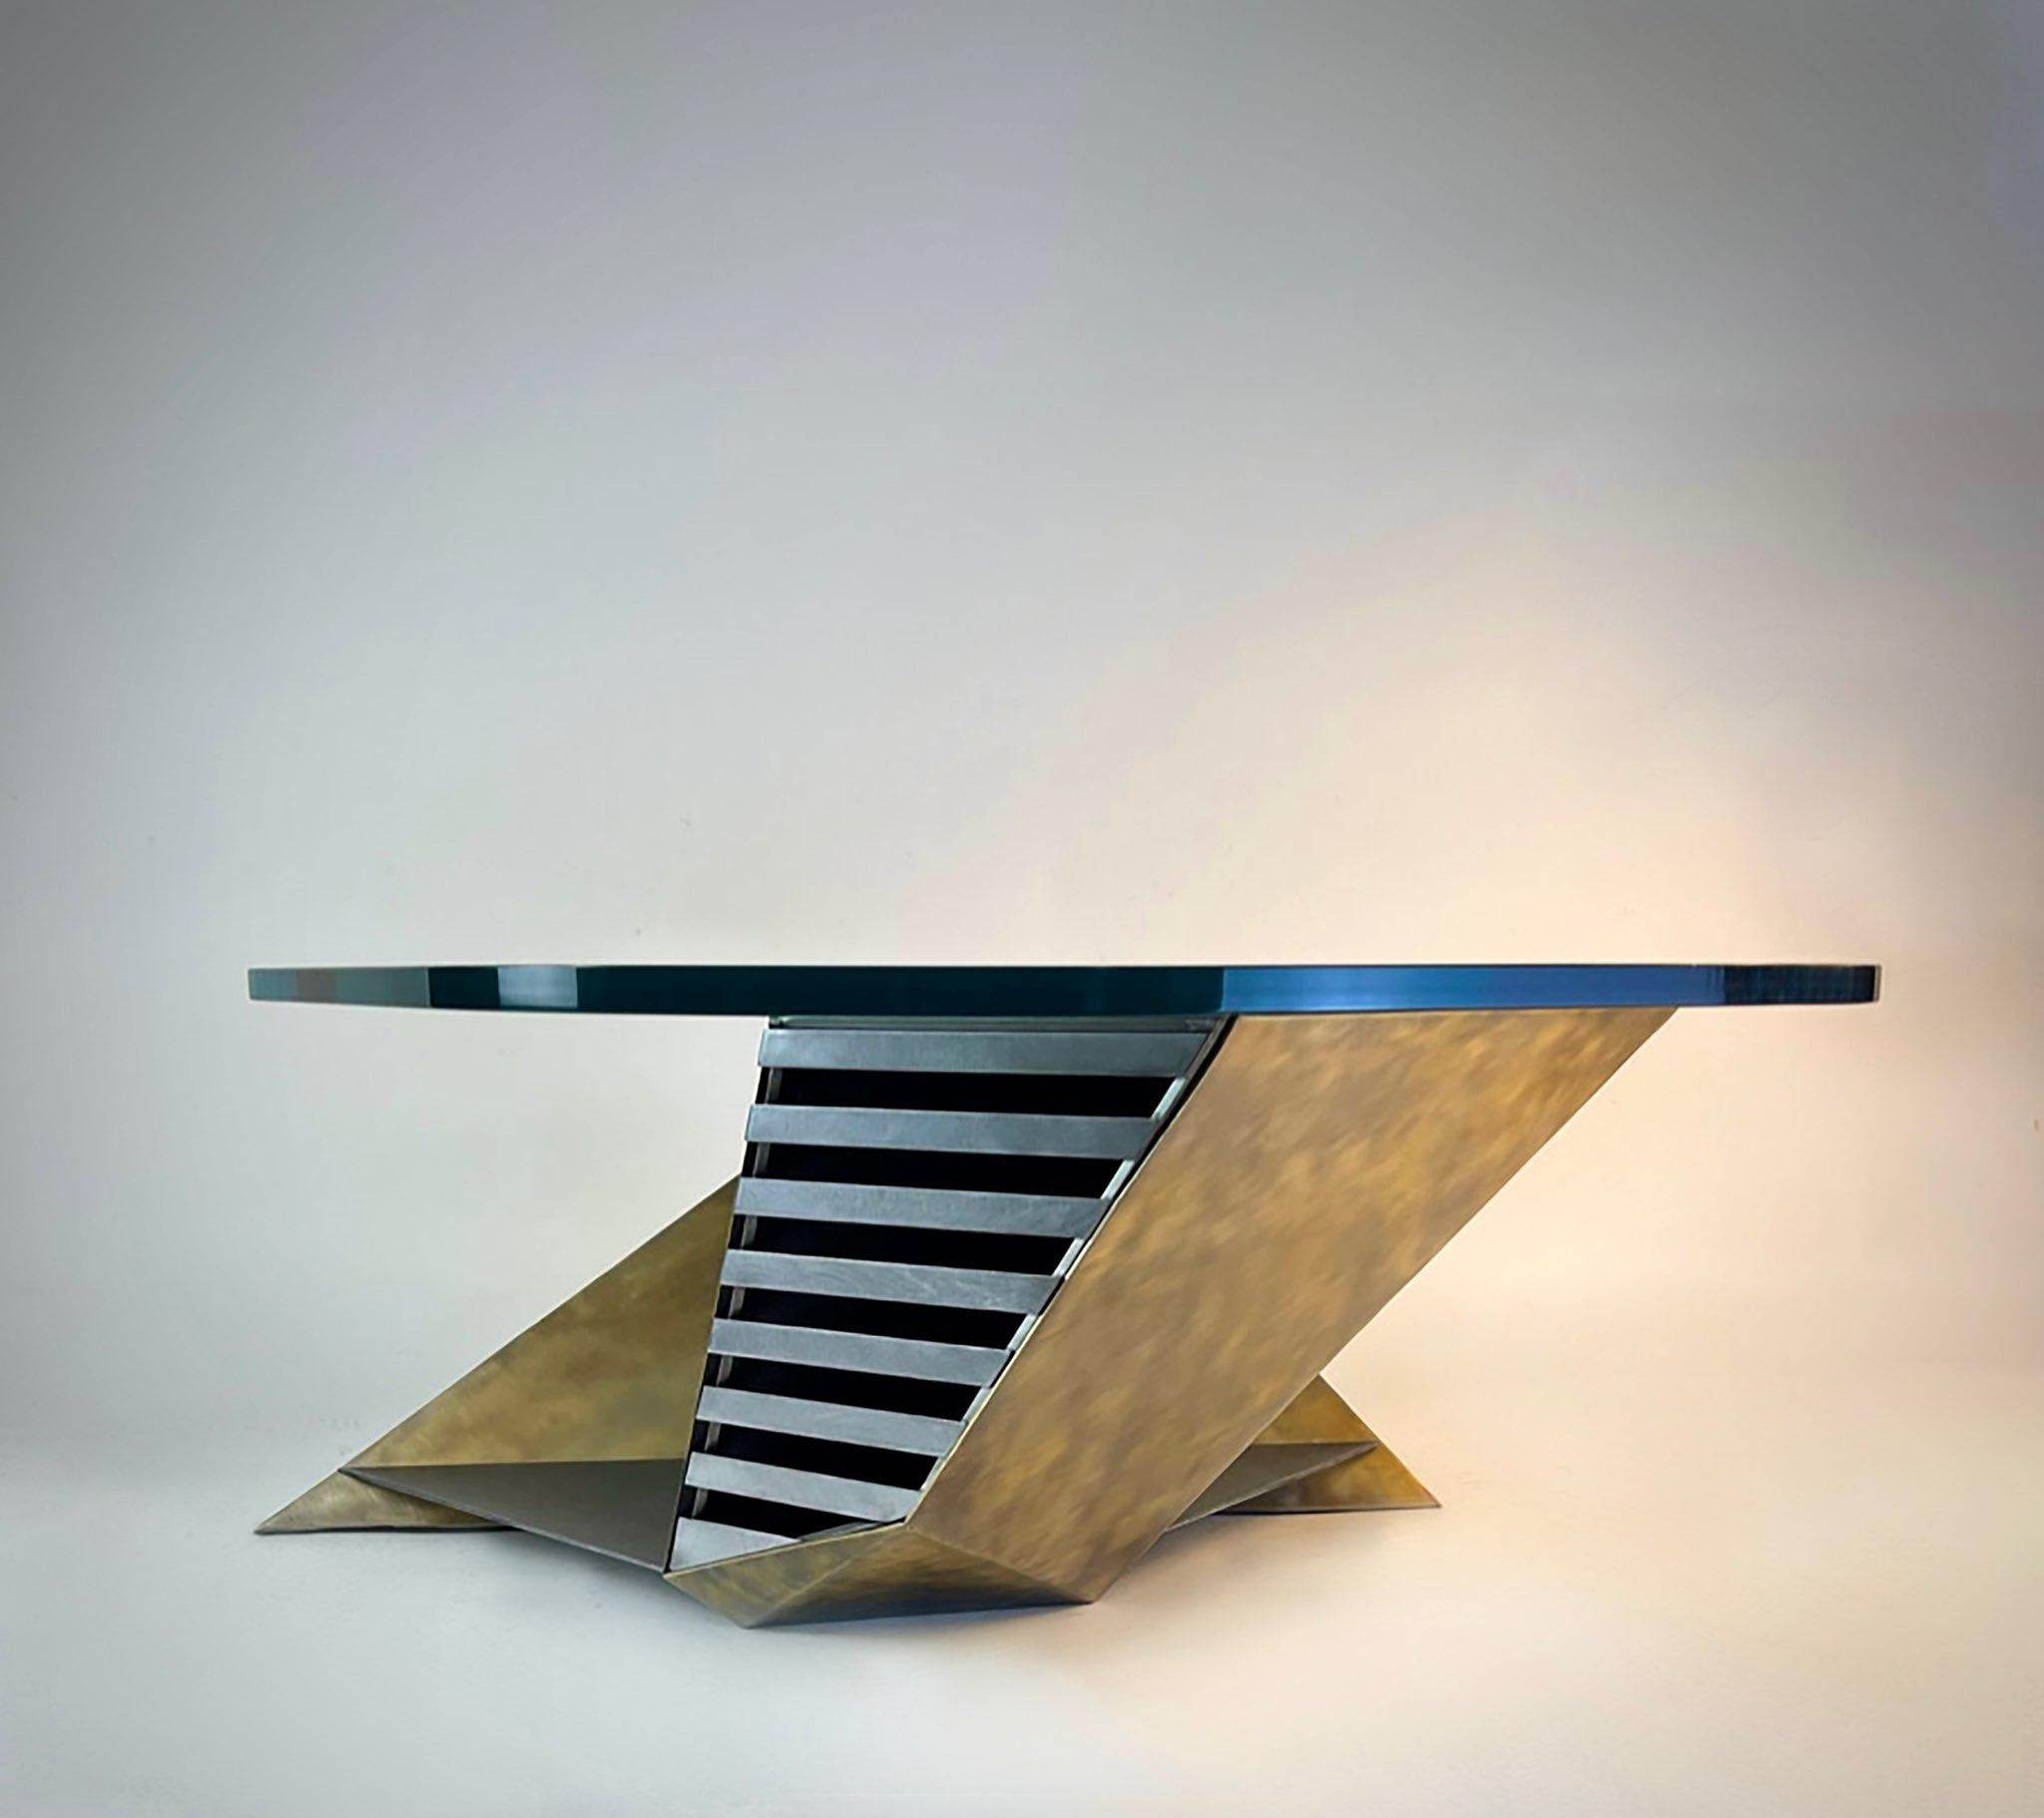 Modern studio craft glass and brass plated steel geometric coffee table. Beautiful hand cut and welded brass polished Steel. Vented areas as well as triangular design in table. The steel base is clear coated. Glass top has rounded polished corners